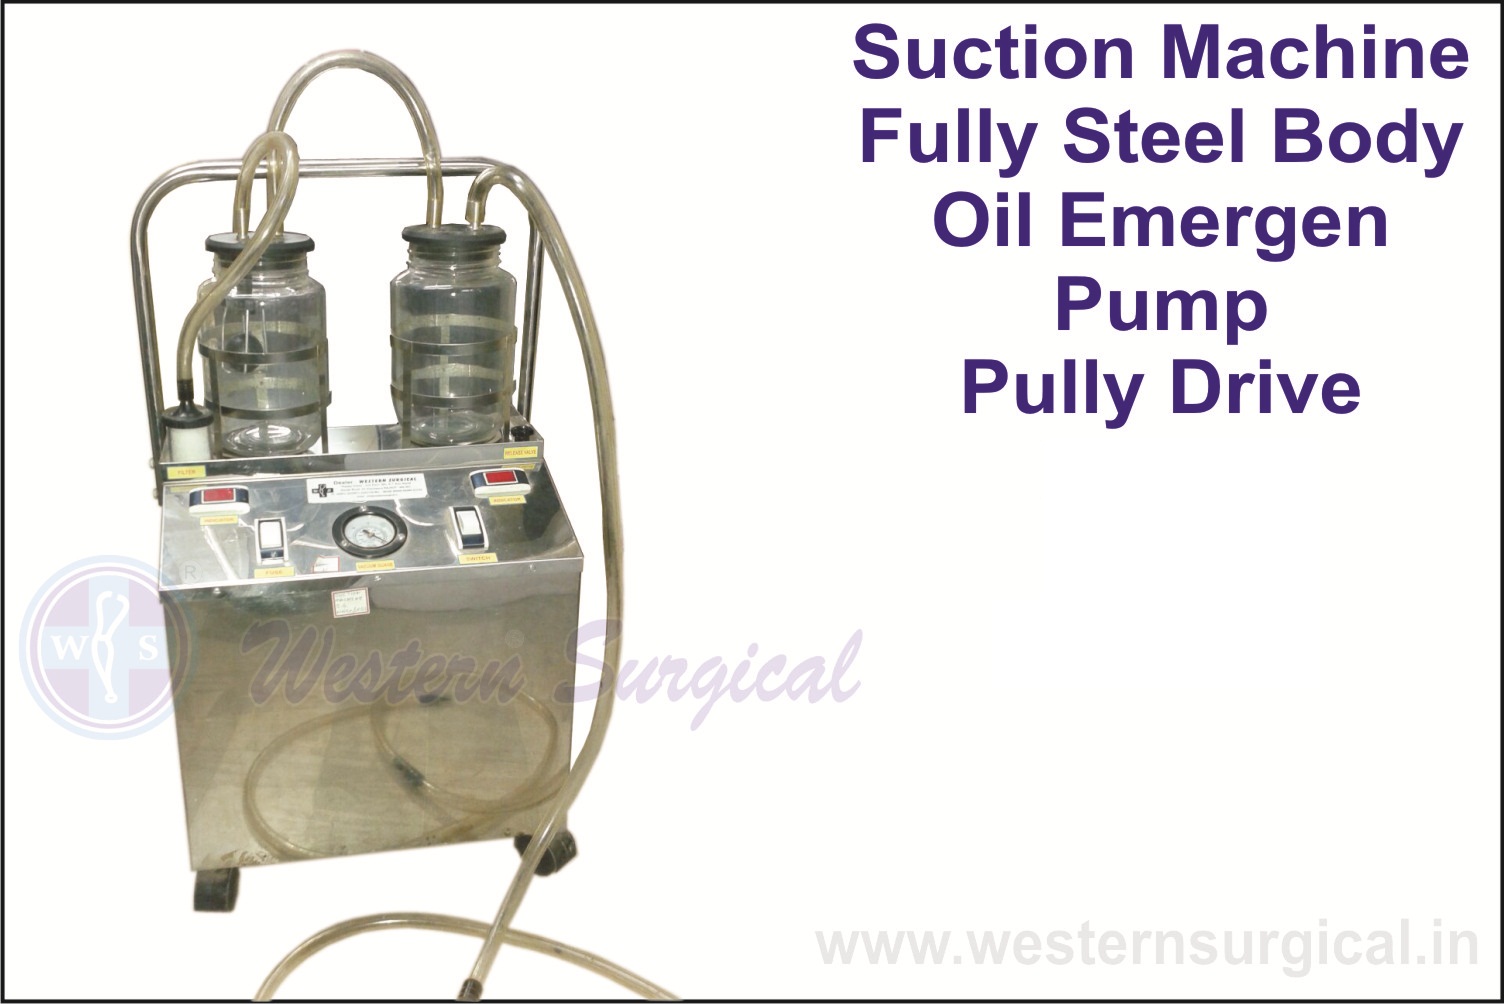 SUCTION MACHINE FULLY STEEL BODY OIL EMERGEN PUMP PULLY DRIVE